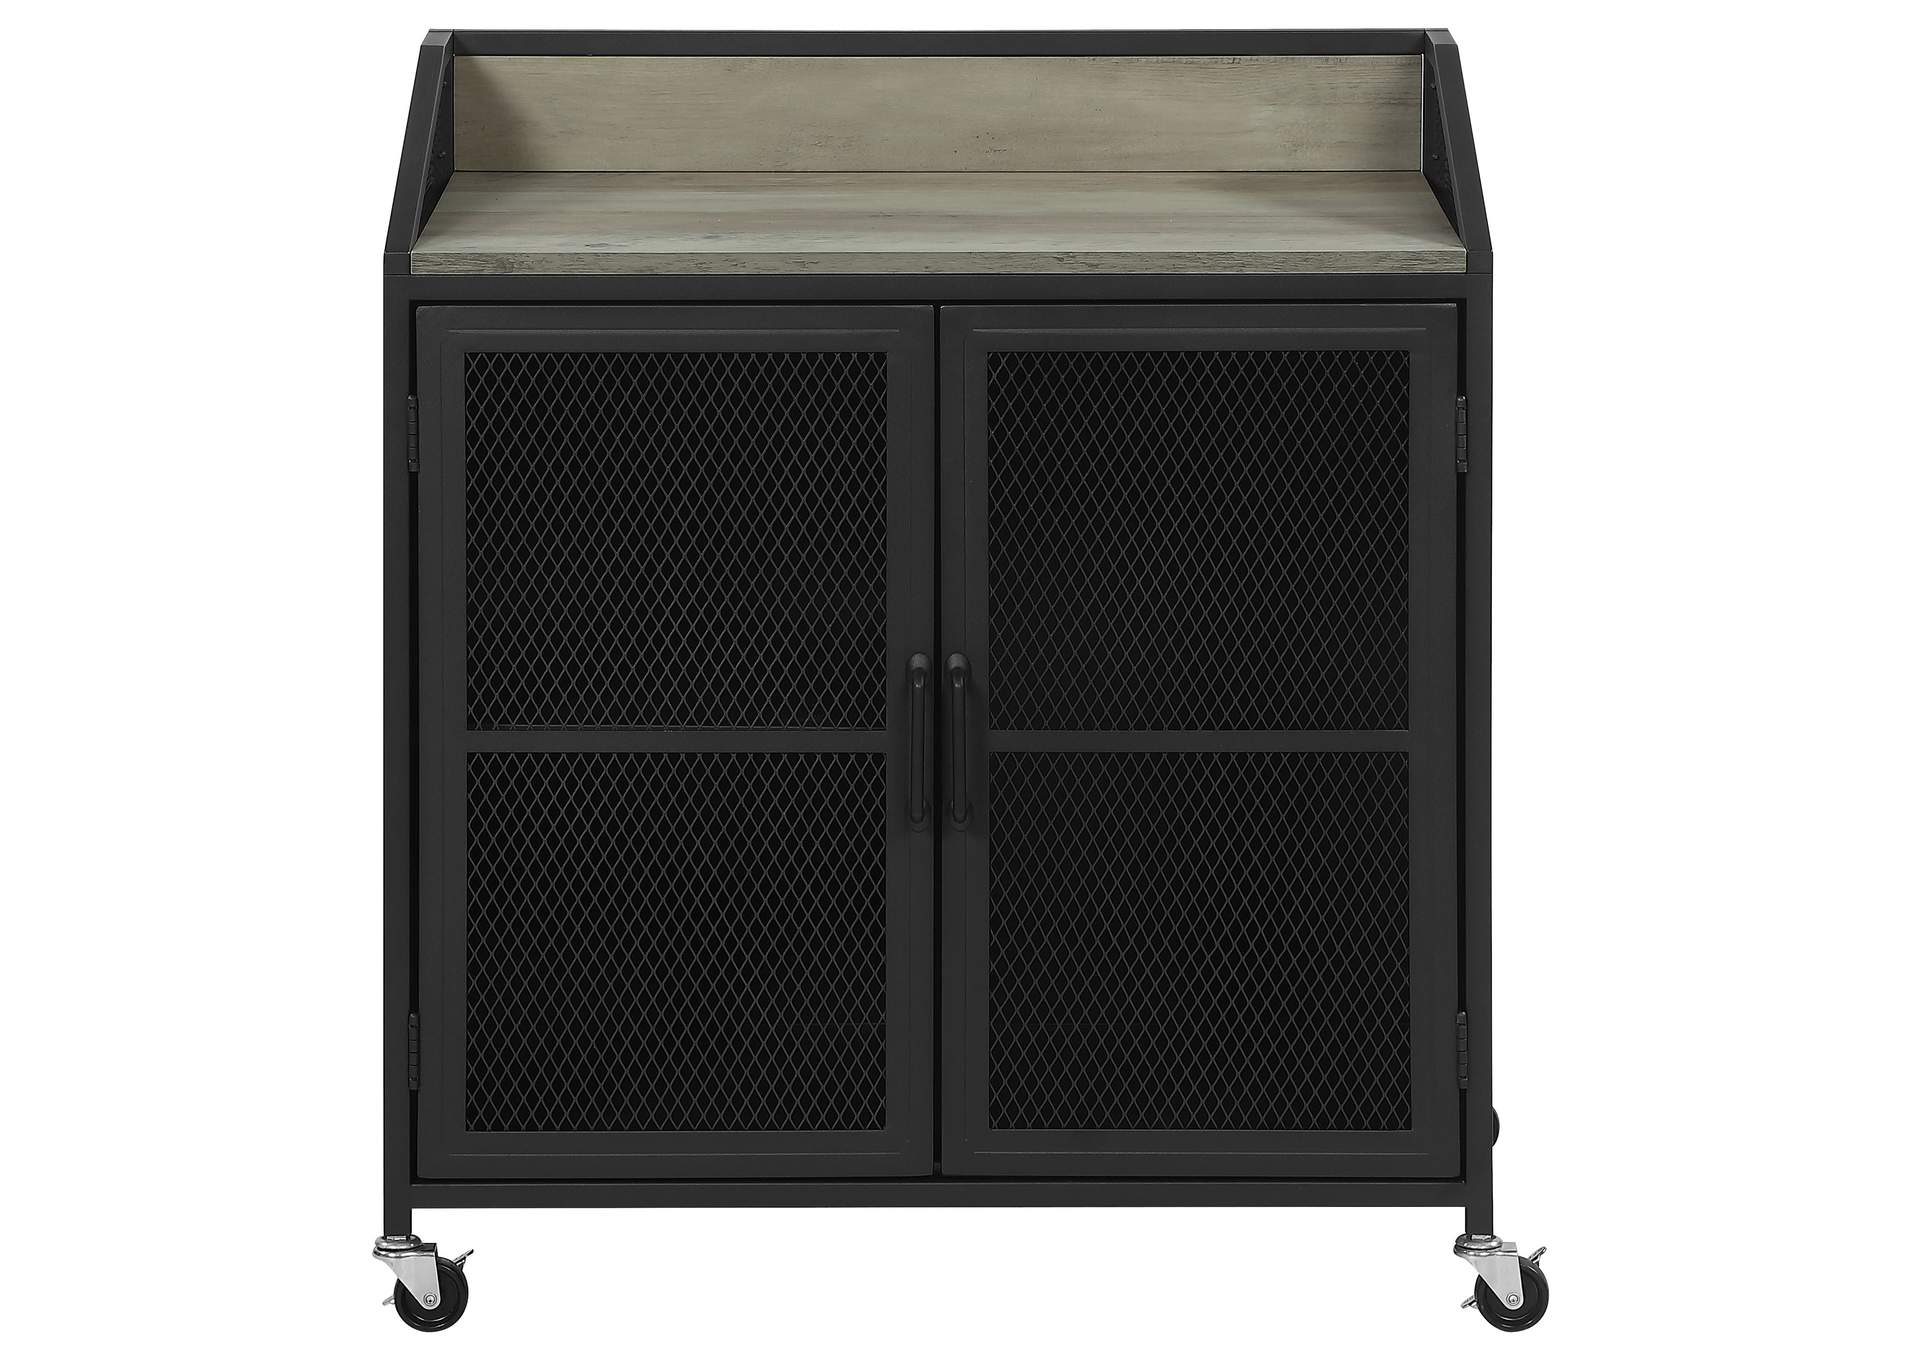 Arlette Wine Cabinet with Wire Mesh Doors Grey Wash and Sandy Black,Coaster Furniture